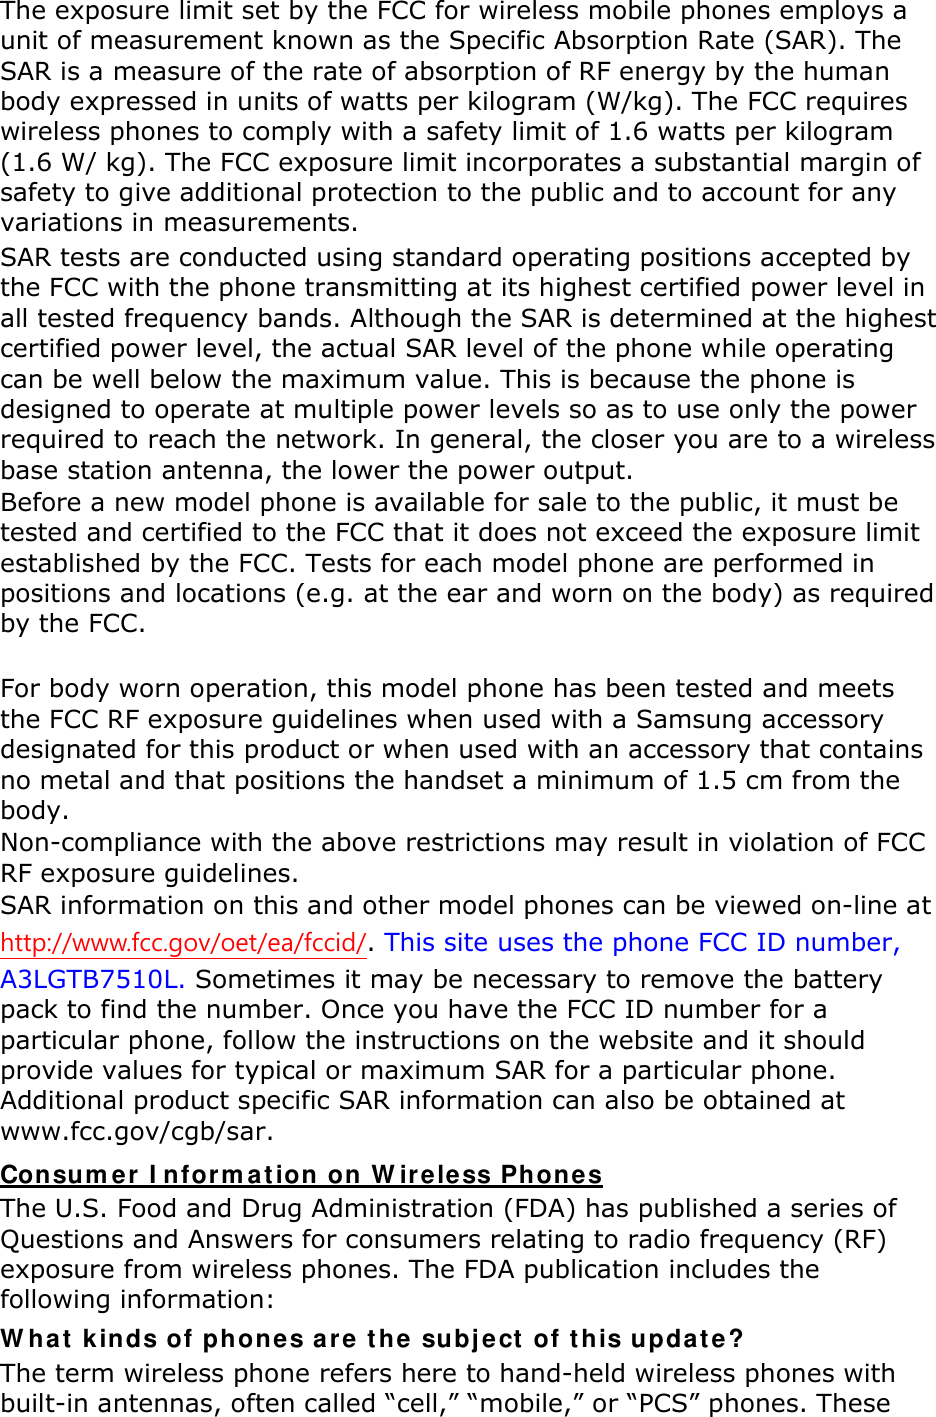 The exposure limit set by the FCC for wireless mobile phones employs a unit of measurement known as the Specific Absorption Rate (SAR). The SAR is a measure of the rate of absorption of RF energy by the human body expressed in units of watts per kilogram (W/kg). The FCC requires wireless phones to comply with a safety limit of 1.6 watts per kilogram (1.6 W/ kg). The FCC exposure limit incorporates a substantial margin of safety to give additional protection to the public and to account for any variations in measurements. SAR tests are conducted using standard operating positions accepted by the FCC with the phone transmitting at its highest certified power level in all tested frequency bands. Although the SAR is determined at the highest certified power level, the actual SAR level of the phone while operating can be well below the maximum value. This is because the phone is designed to operate at multiple power levels so as to use only the power required to reach the network. In general, the closer you are to a wireless base station antenna, the lower the power output. Before a new model phone is available for sale to the public, it must be tested and certified to the FCC that it does not exceed the exposure limit established by the FCC. Tests for each model phone are performed in positions and locations (e.g. at the ear and worn on the body) as required by the FCC.      For body worn operation, this model phone has been tested and meets the FCC RF exposure guidelines when used with a Samsung accessory designated for this product or when used with an accessory that contains no metal and that positions the handset a minimum of 1.5 cm from the body.   Non-compliance with the above restrictions may result in violation of FCC RF exposure guidelines. SAR information on this and other model phones can be viewed on-line at http://www.fcc.gov/oet/ea/fccid/. This site uses the phone FCC ID number, A3LGTB7510L. Sometimes it may be necessary to remove the battery pack to find the number. Once you have the FCC ID number for a particular phone, follow the instructions on the website and it should provide values for typical or maximum SAR for a particular phone. Additional product specific SAR information can also be obtained at www.fcc.gov/cgb/sar. Consumer Information on Wireless Phones The U.S. Food and Drug Administration (FDA) has published a series of Questions and Answers for consumers relating to radio frequency (RF) exposure from wireless phones. The FDA publication includes the following information: What kinds of phones are the subject of this update? The term wireless phone refers here to hand-held wireless phones with built-in antennas, often called “cell,” “mobile,” or “PCS” phones. These 